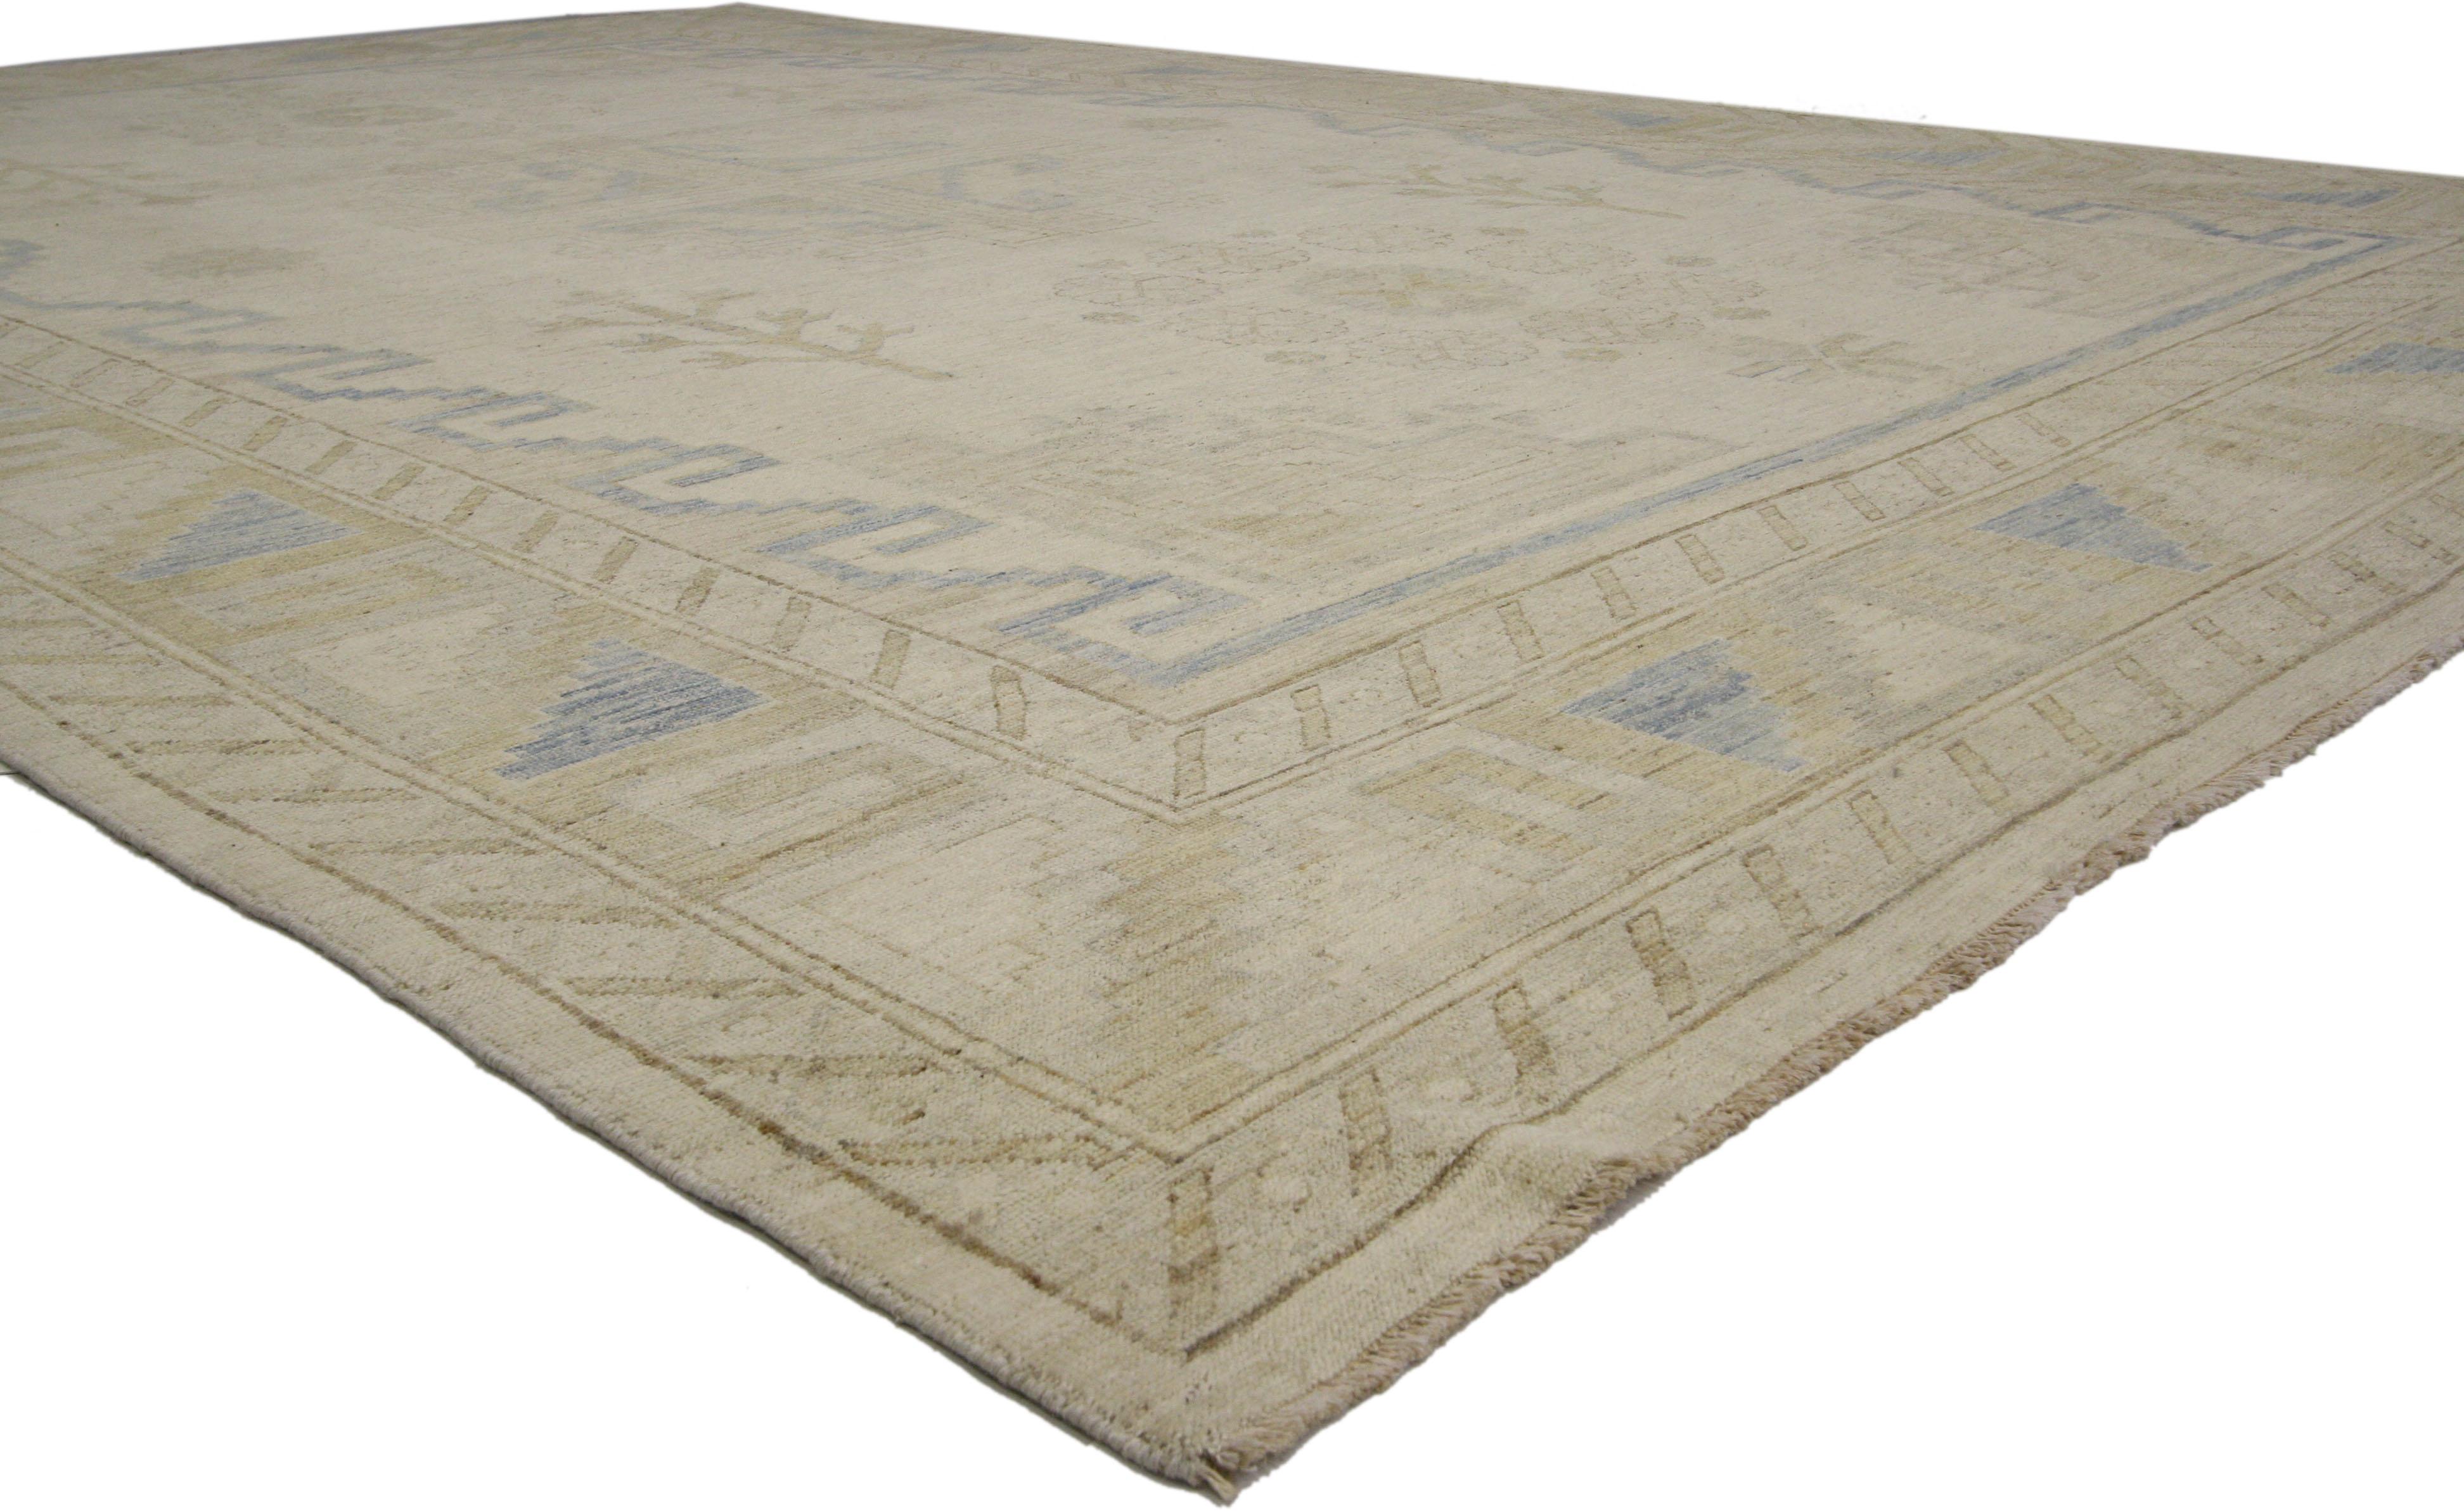 Pakistani New Transitional Area Rug with Khotan Design in Warm, Neutral Colors